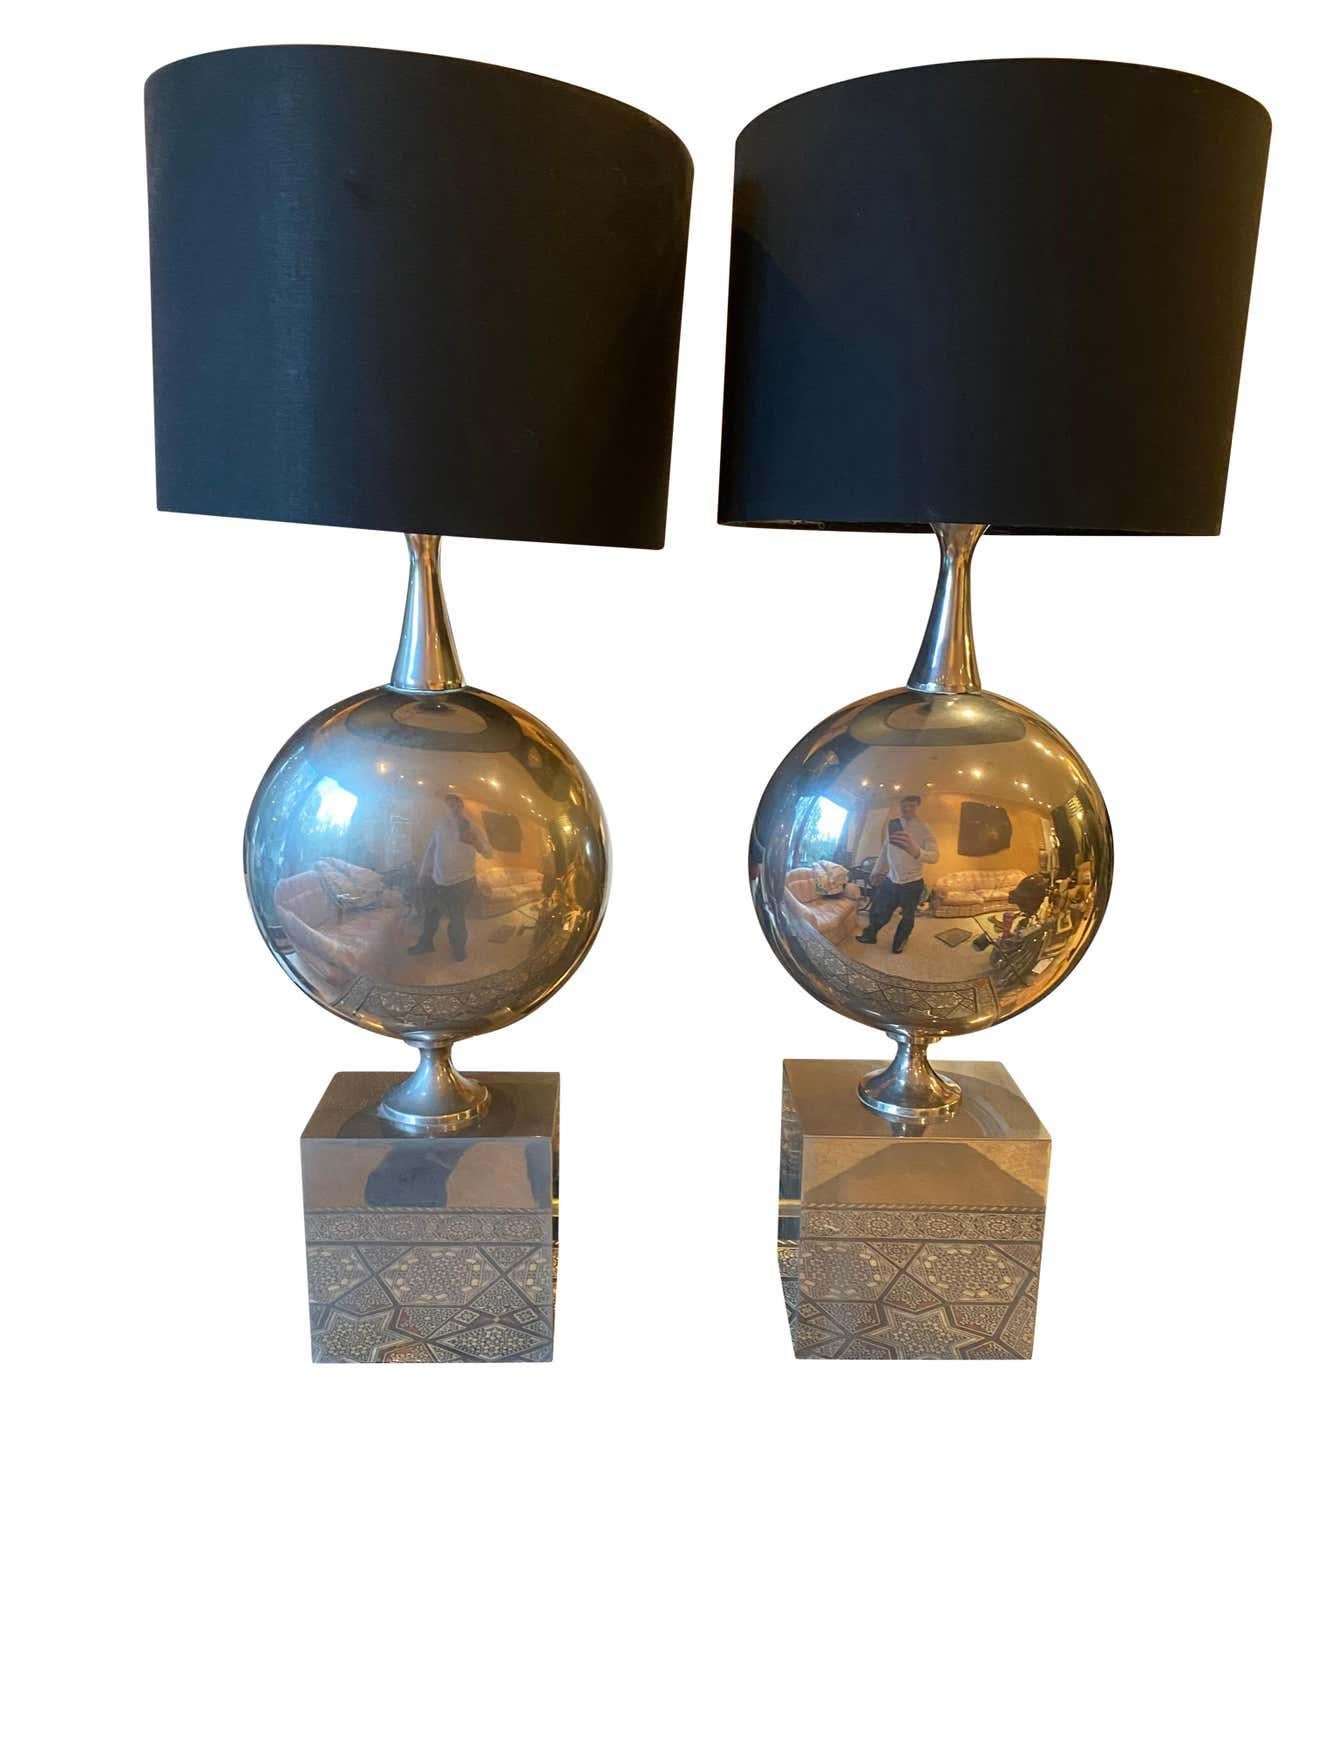 French Maison Barbier Pair of Chromed Steel Table Lamps, 1970s For Sale